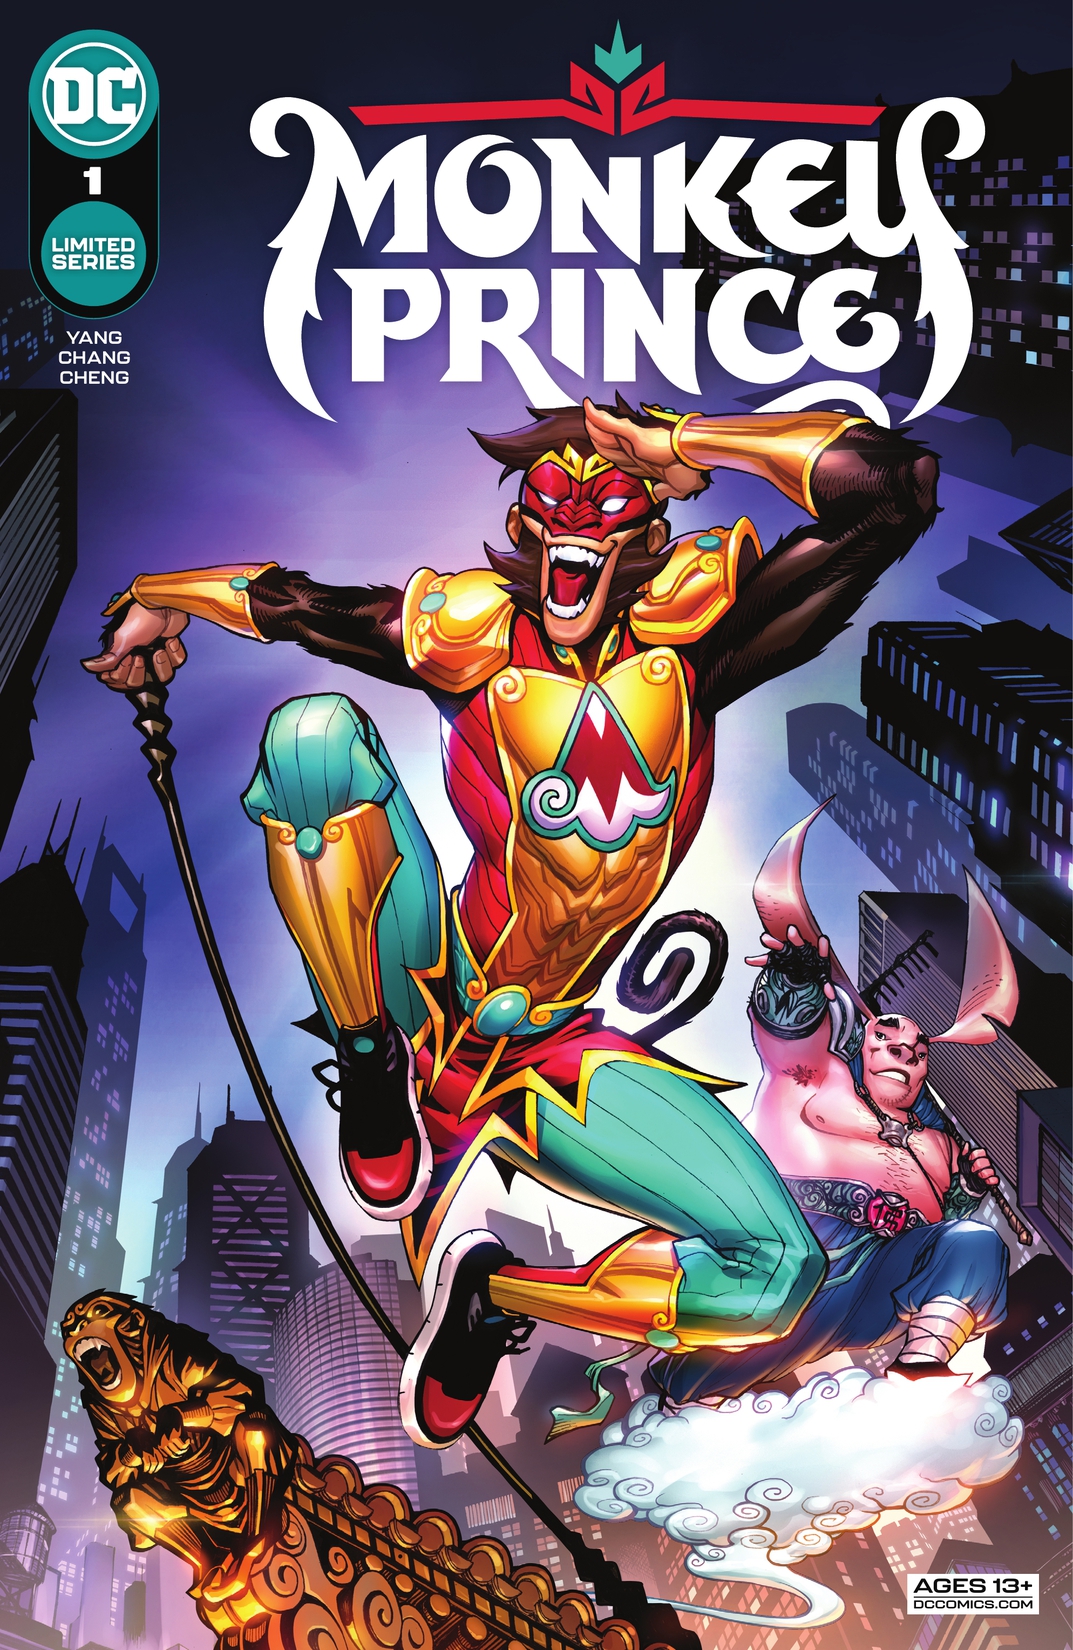 Monkey Prince #1 preview images